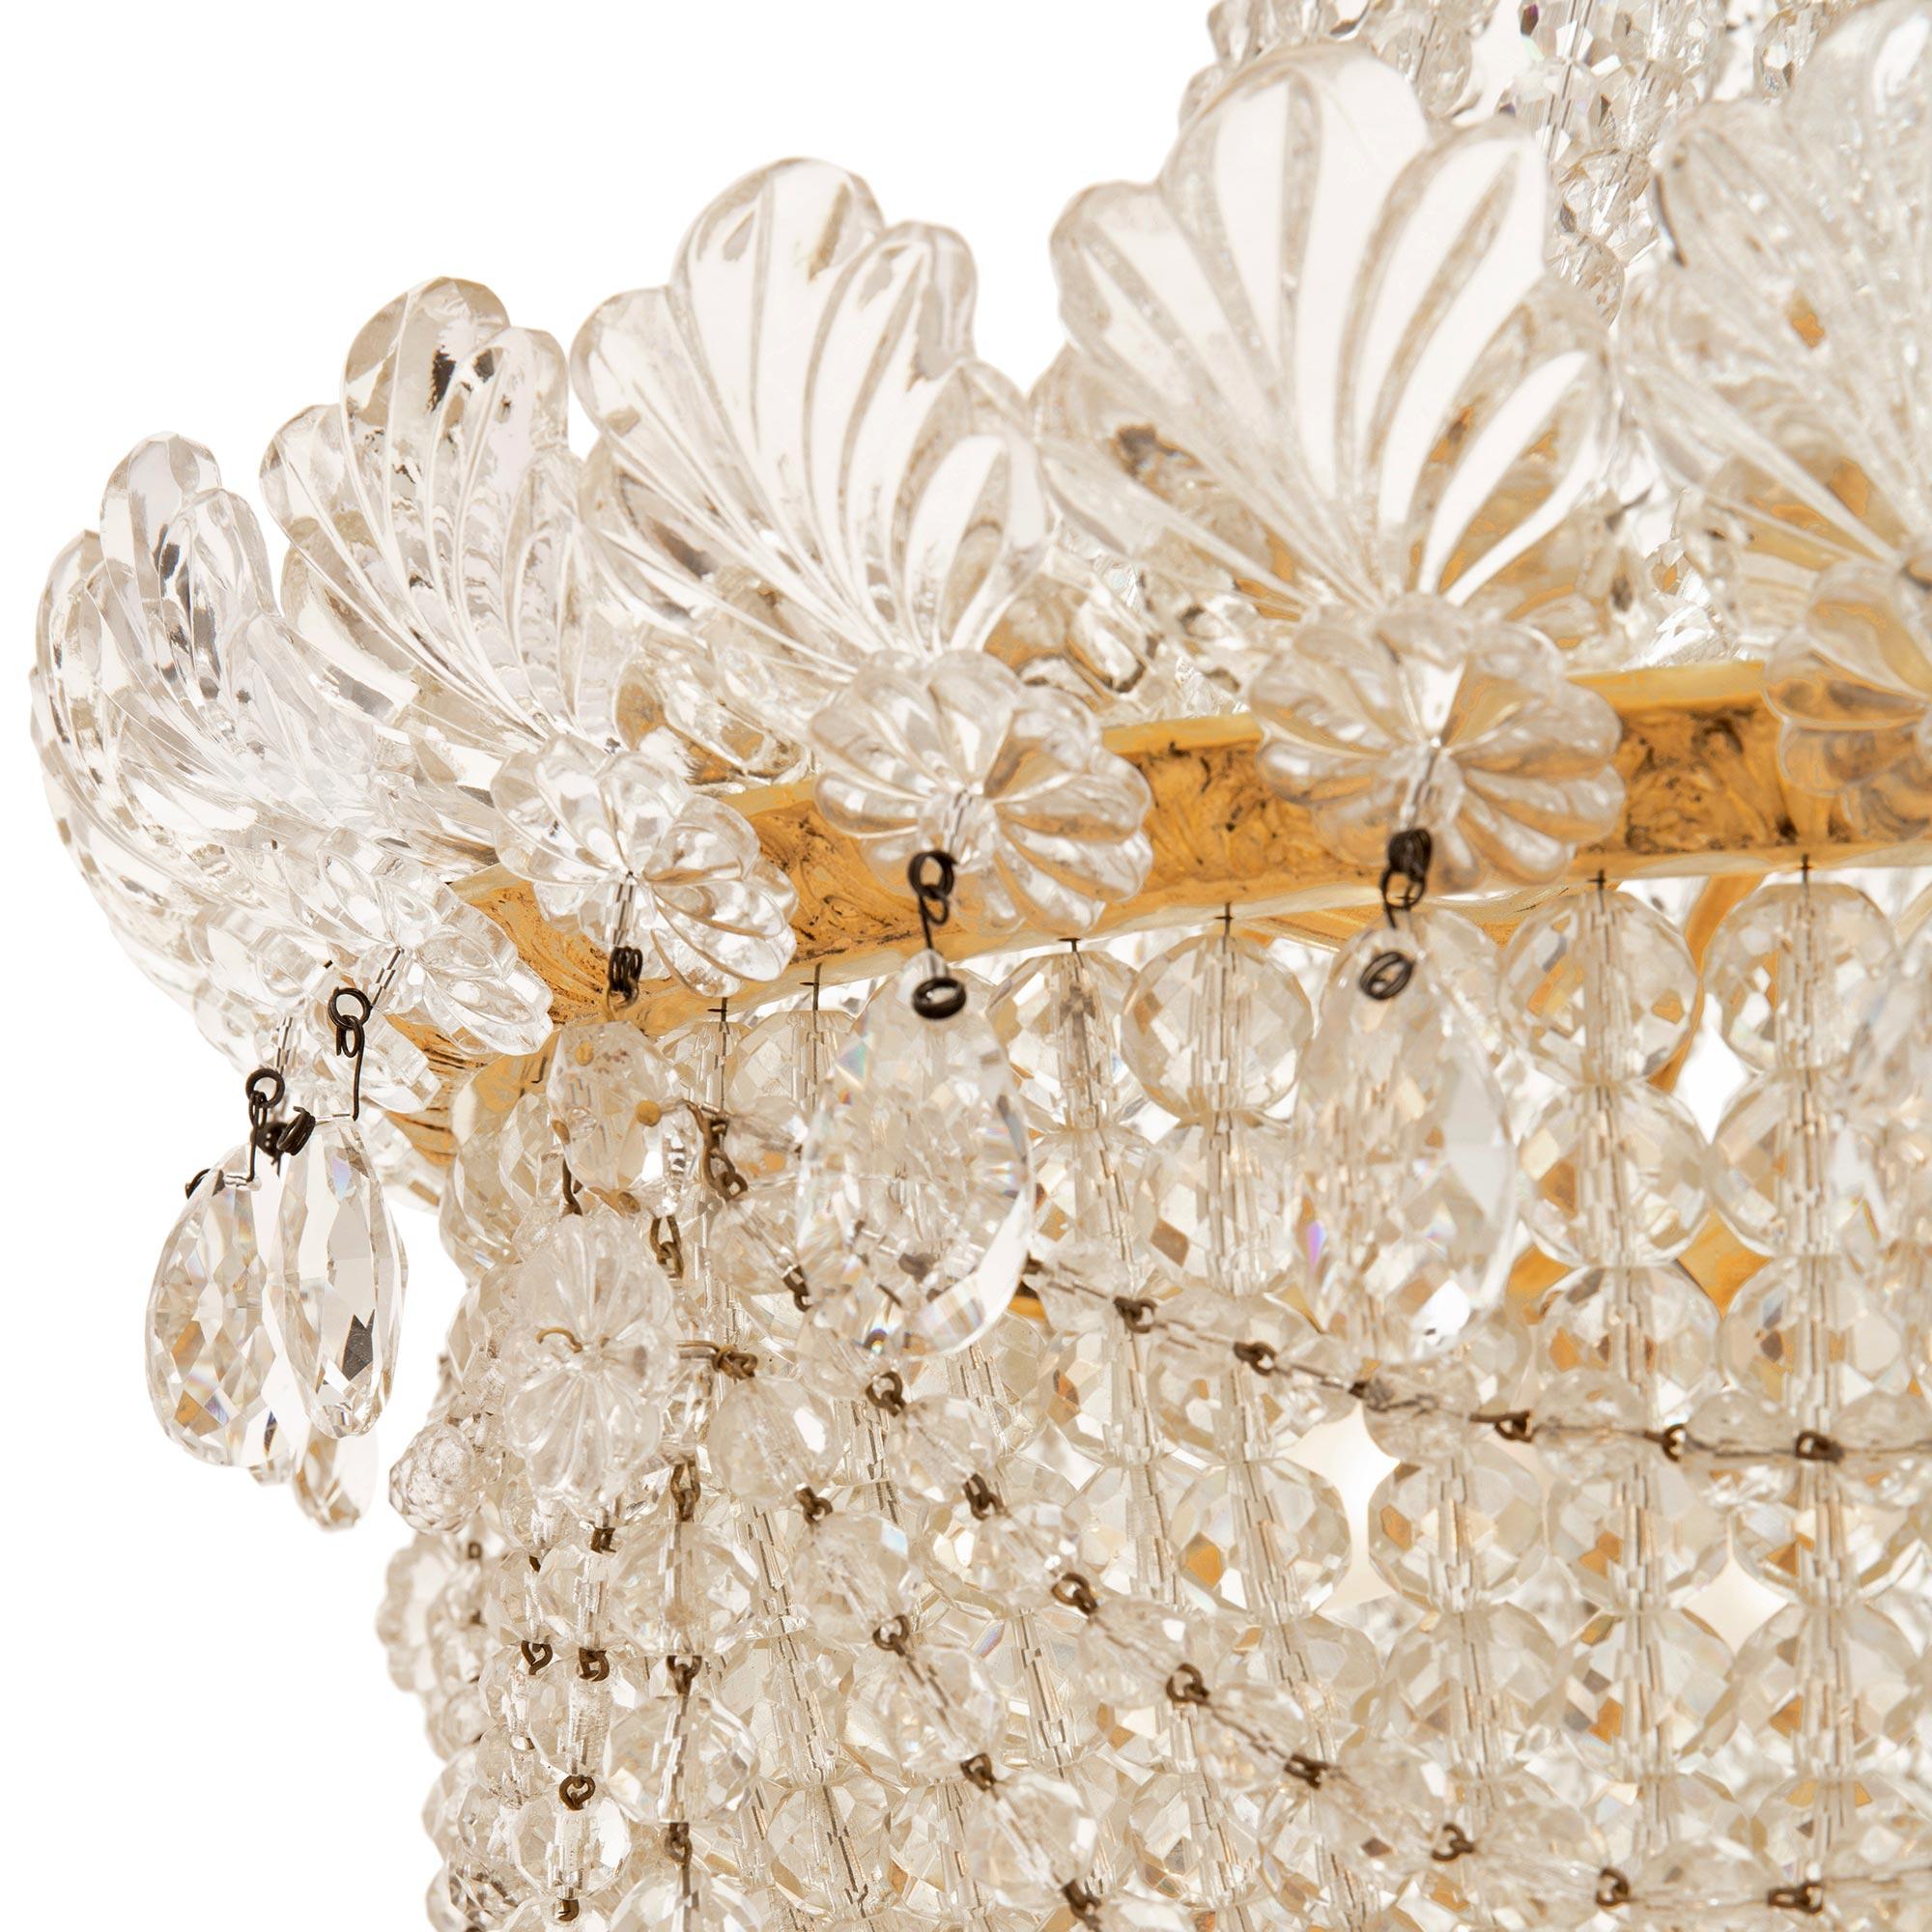 French 19th Century Belle Époque Period Baccarat Crystal and Ormolu Chandelier For Sale 2